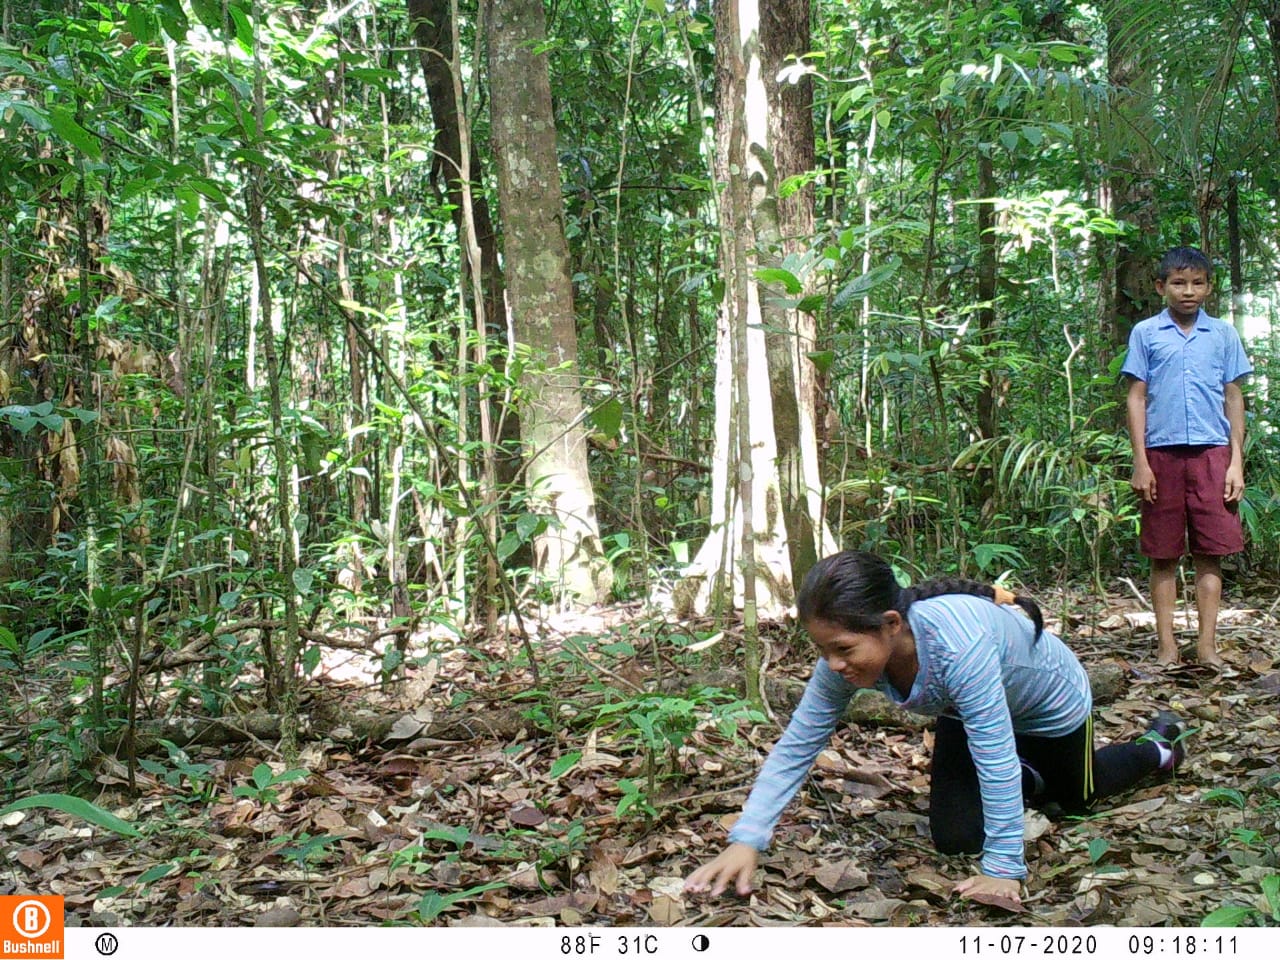 After setting the camera trap, young club members test the setting and senor, by pretending to be a jaguar.